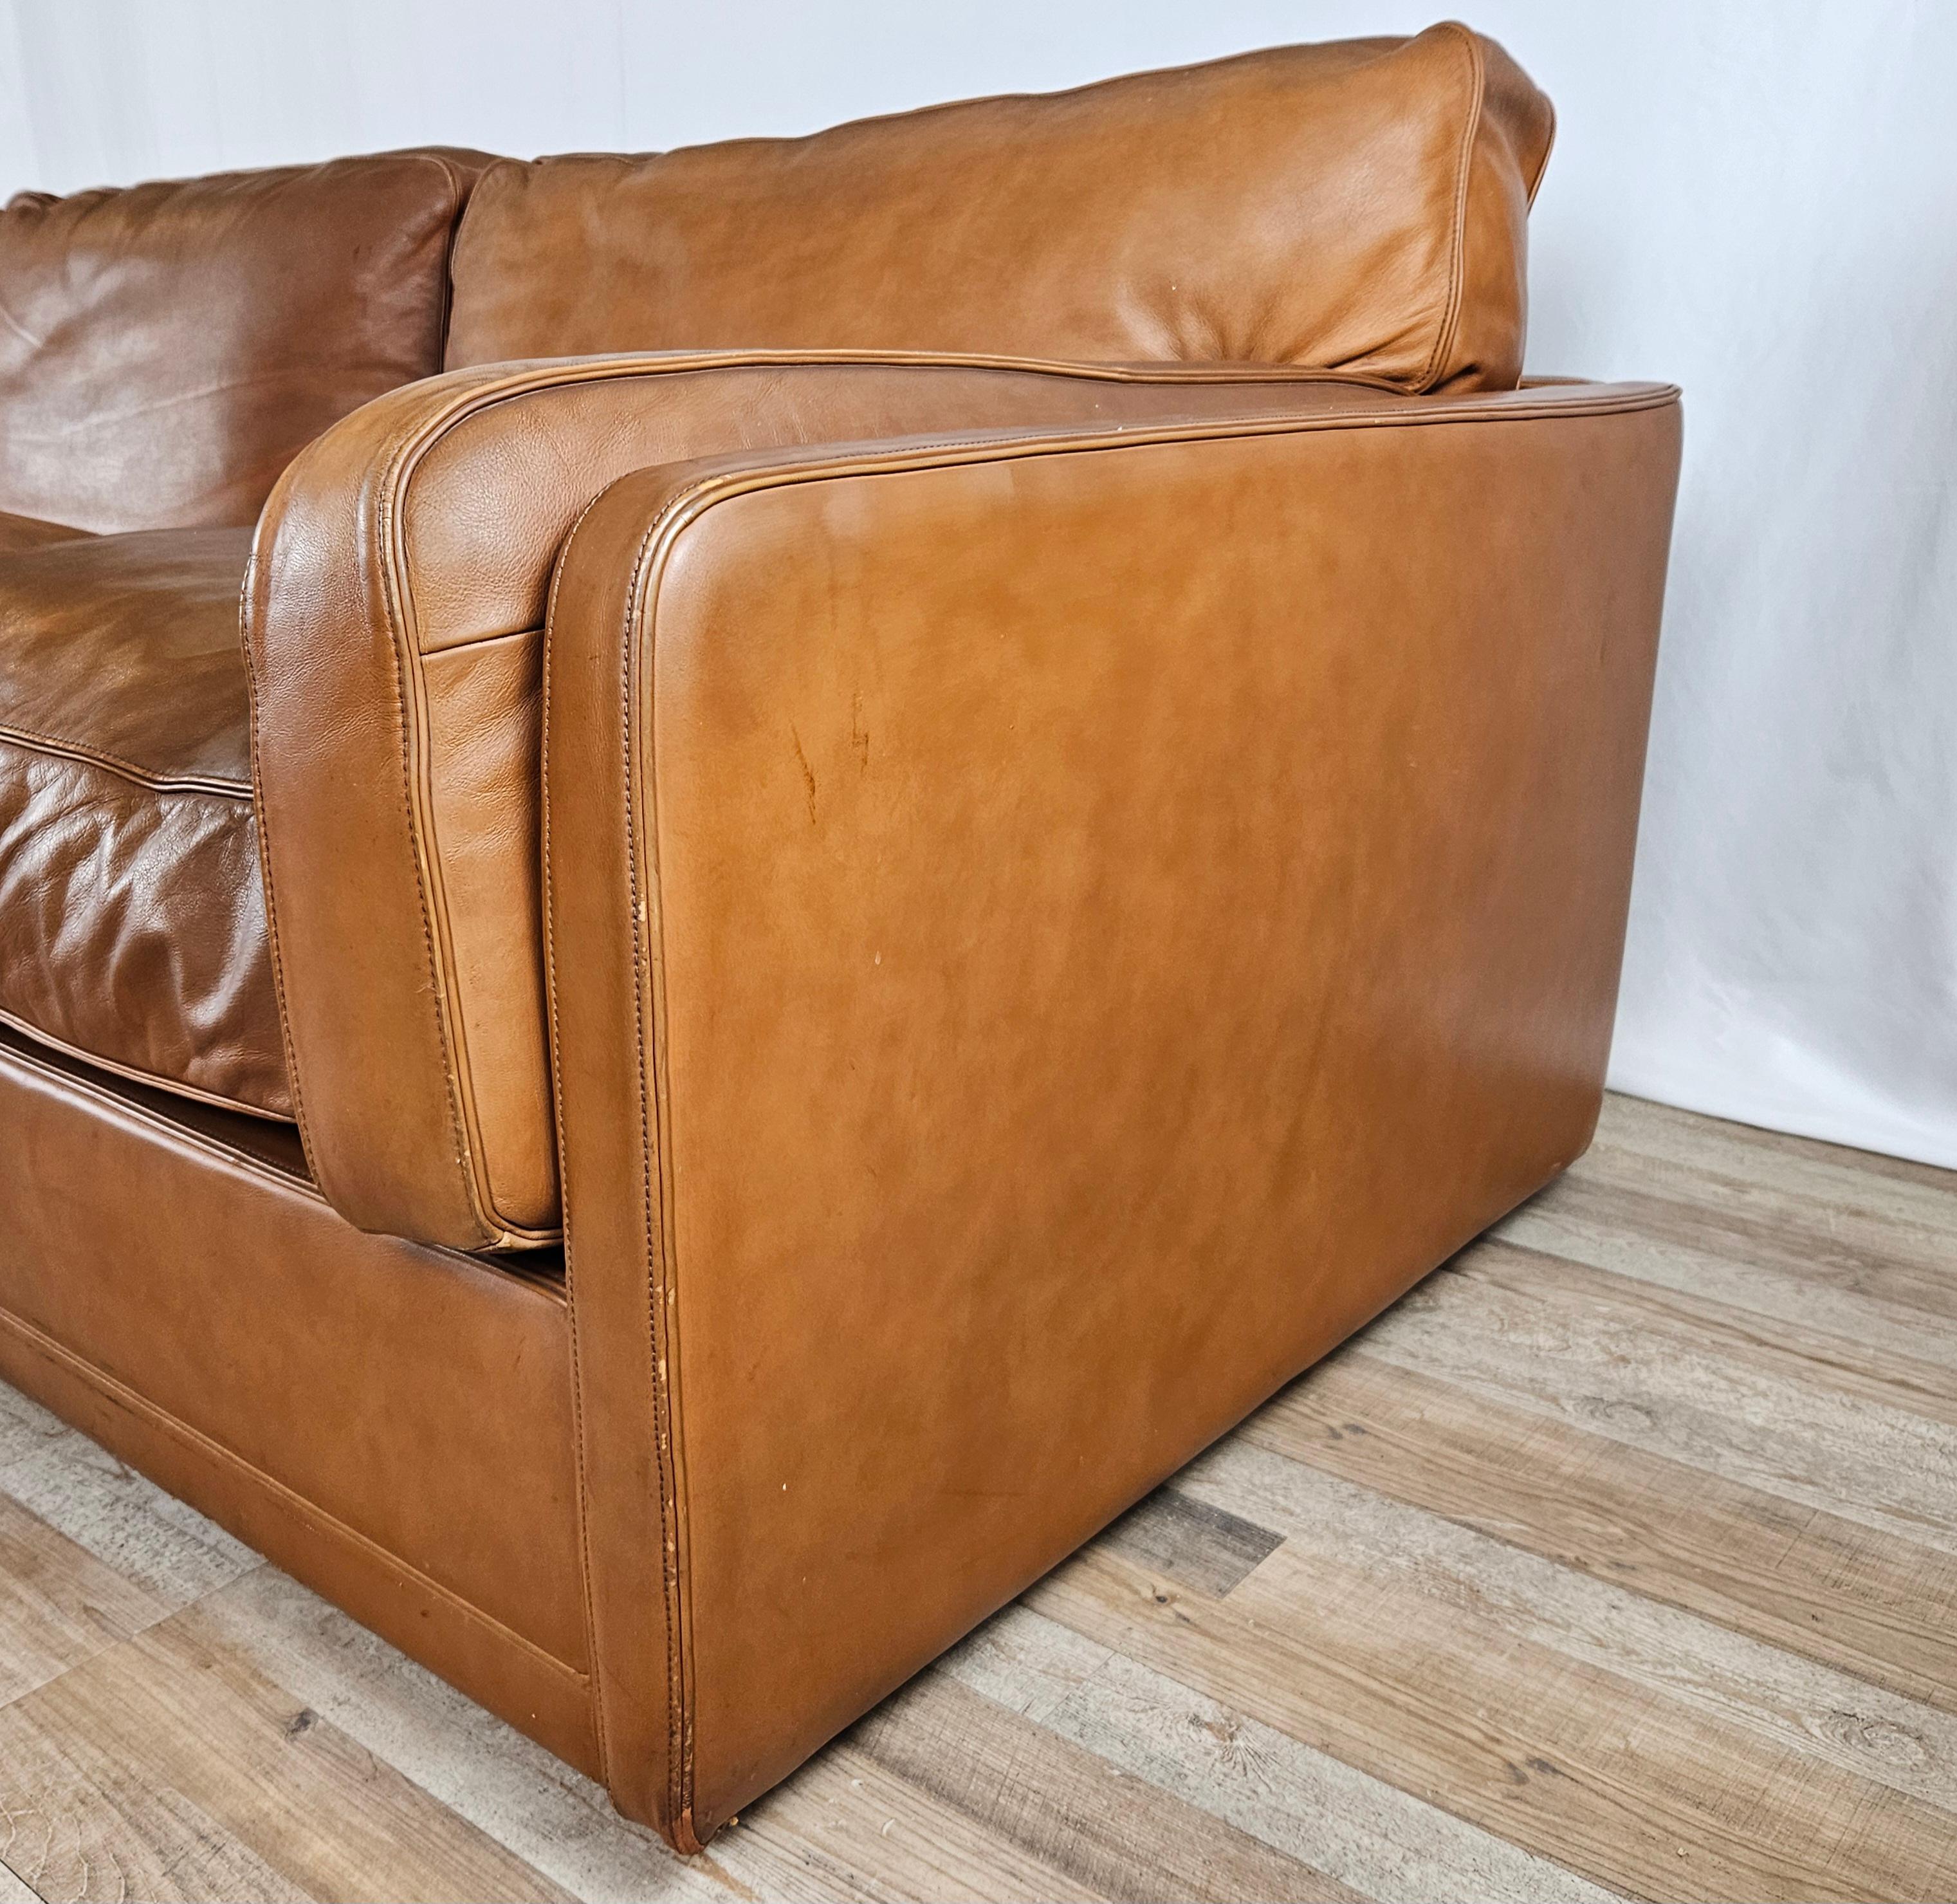 Mid-Century Modern Poltrona Frau three-seater 1970s sofa in cognac-colored leather For Sale